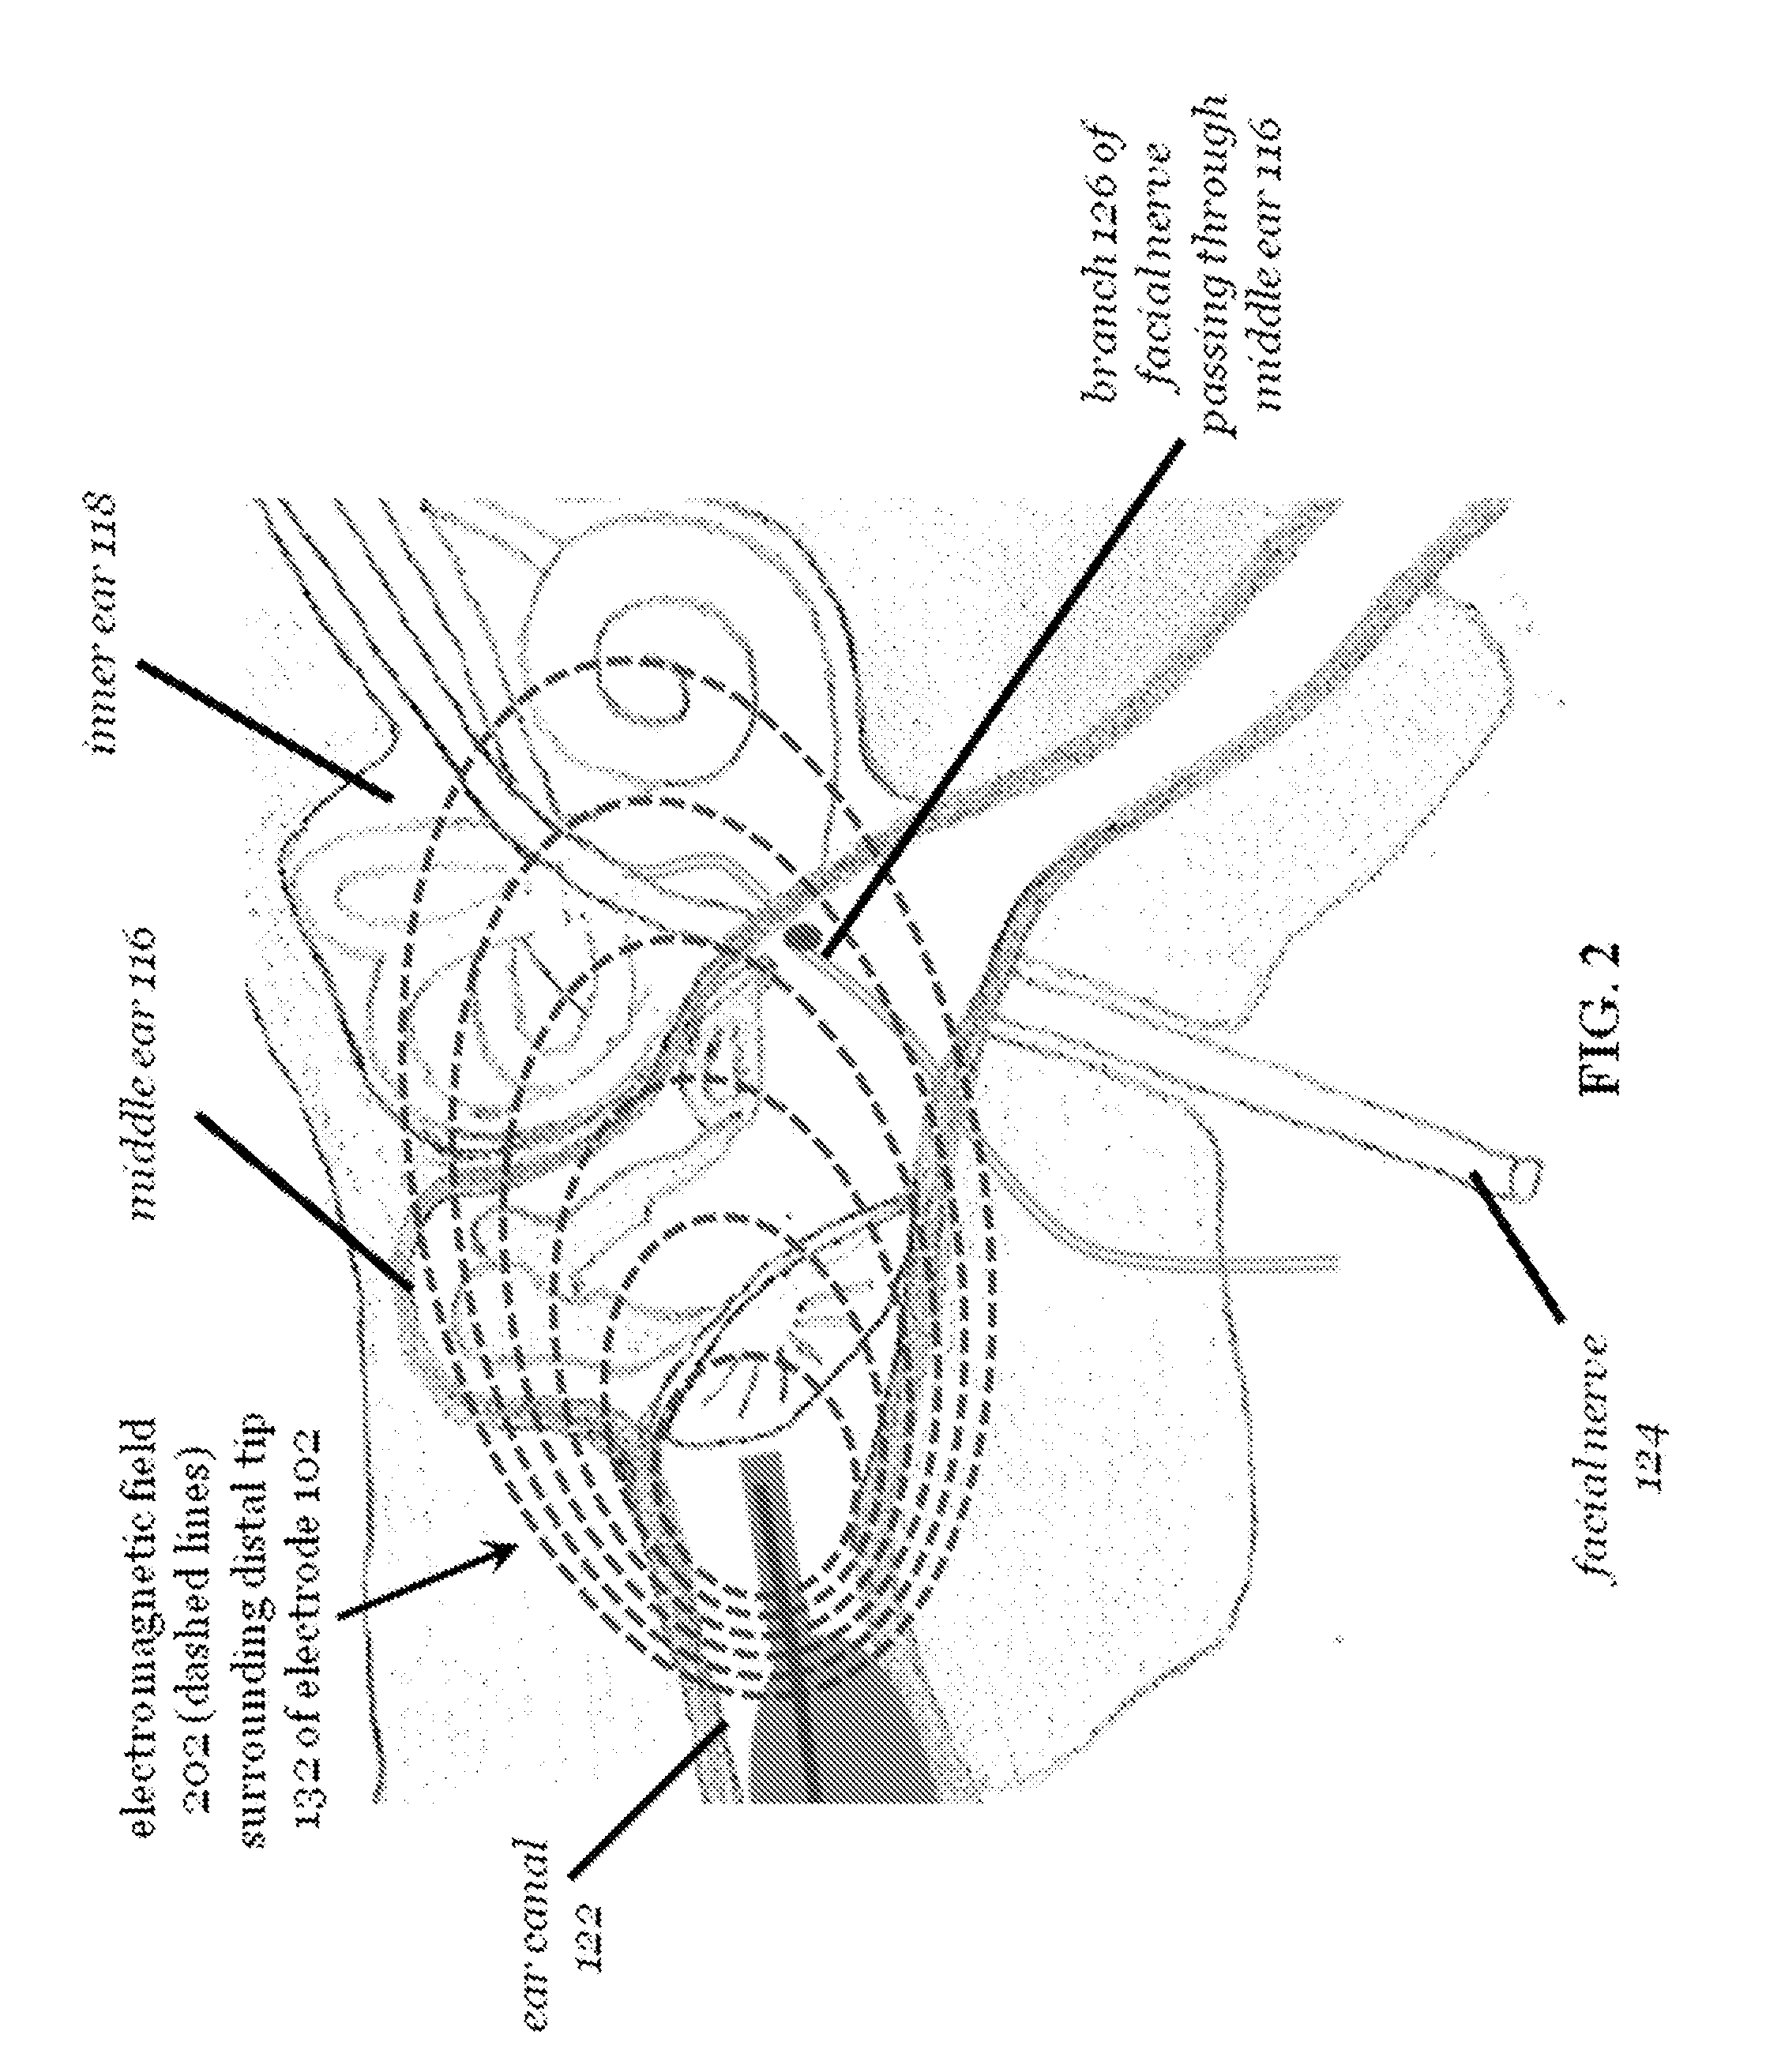 Modulating function of the facial nerve system or related neural structures via the ear